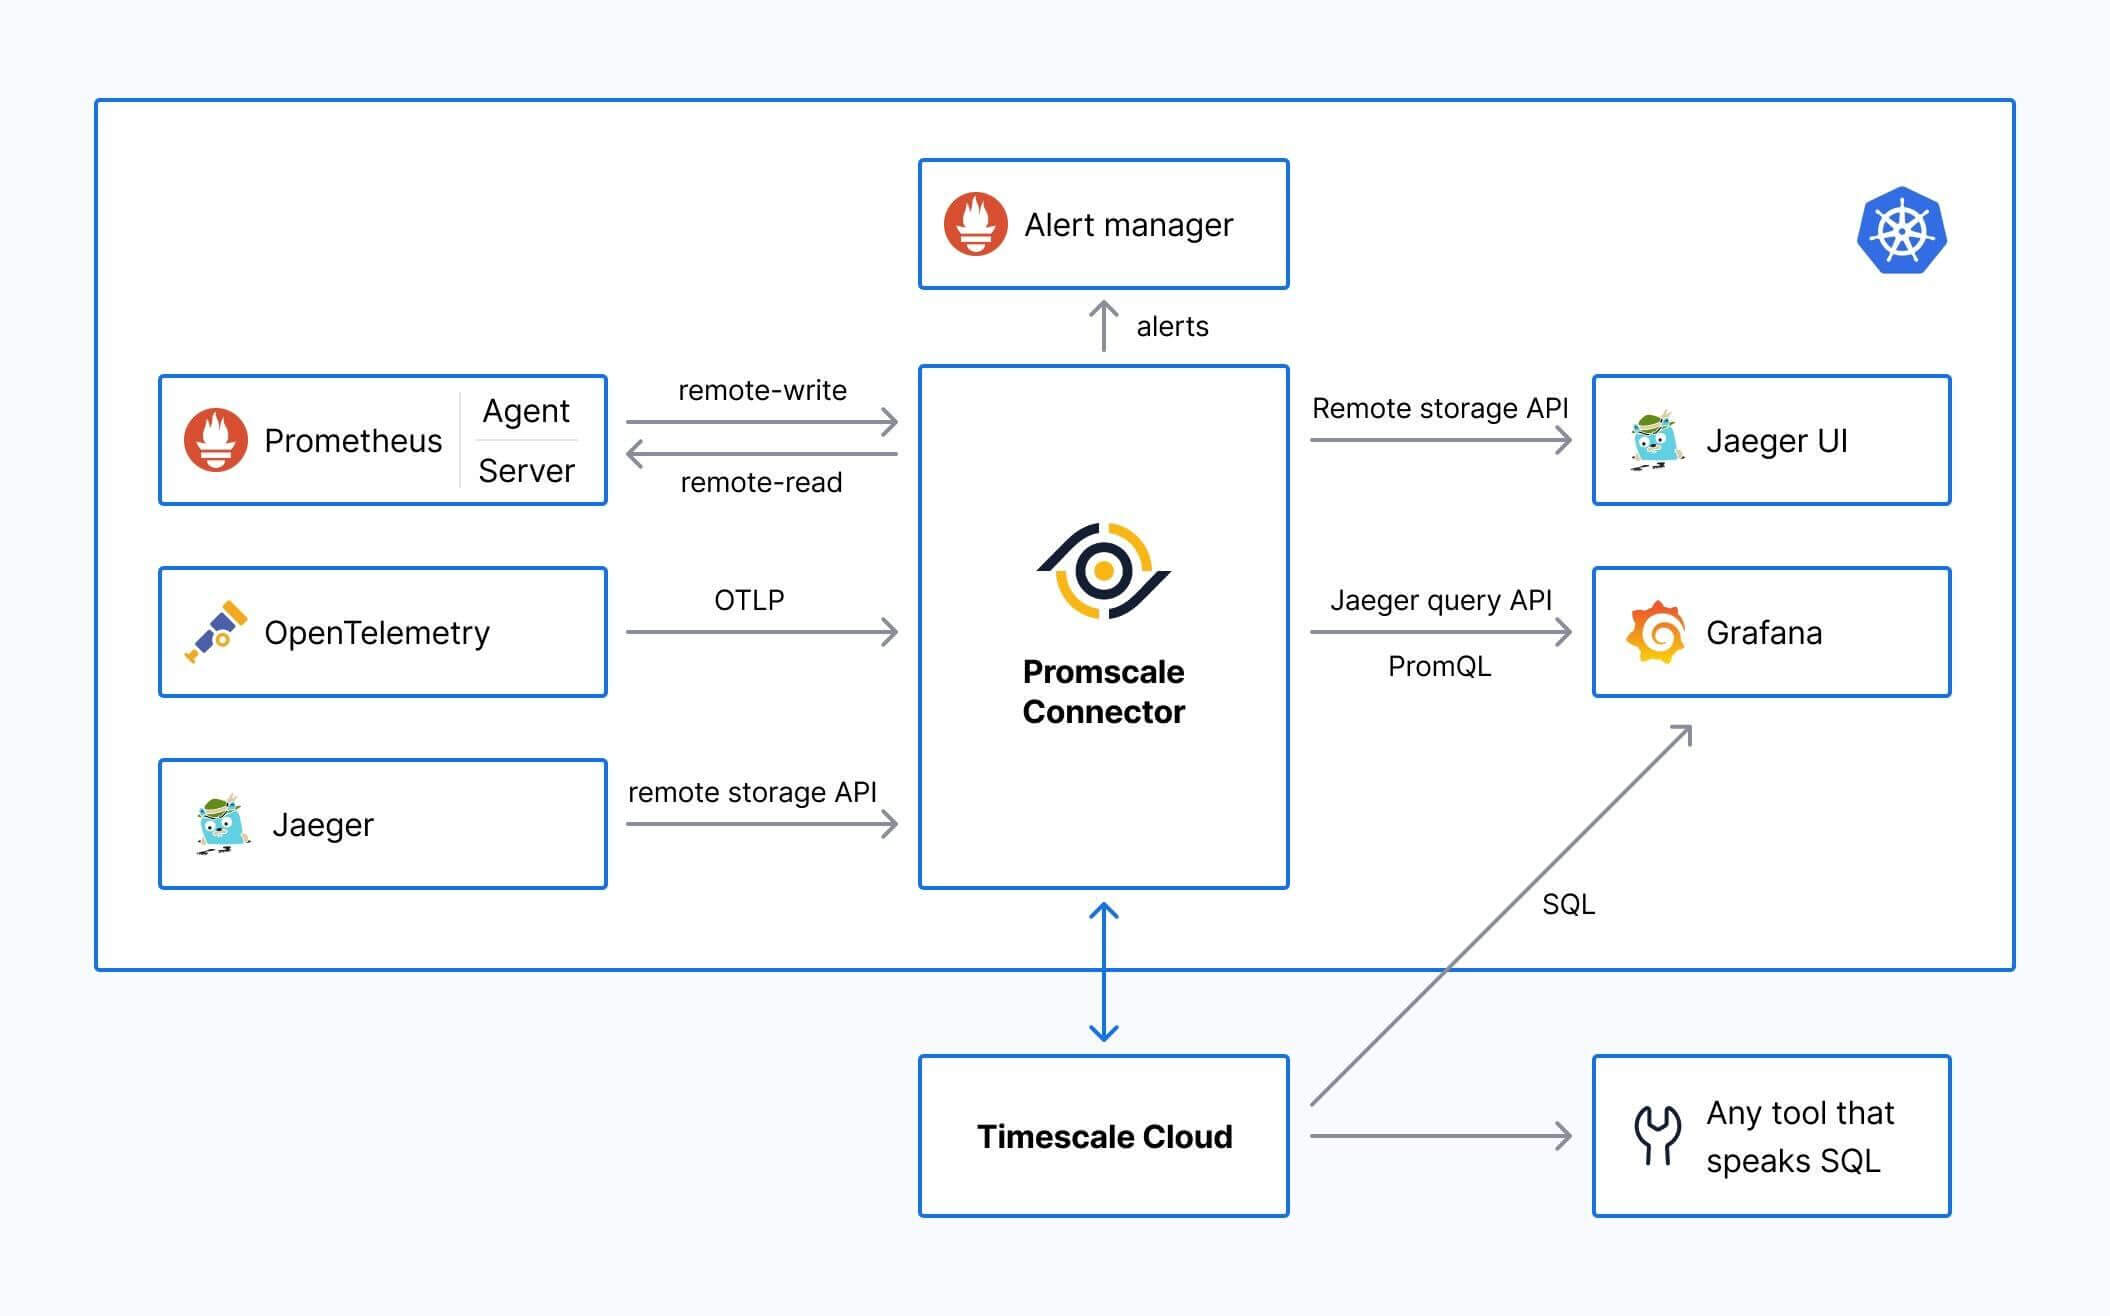 Architecture diagram showing an observability stack with Timescale Cloud as the backend, where OpenTelemetry, Prometheus, Promscale, Jaeger, and Grafana are running in a Kubernetes cluster